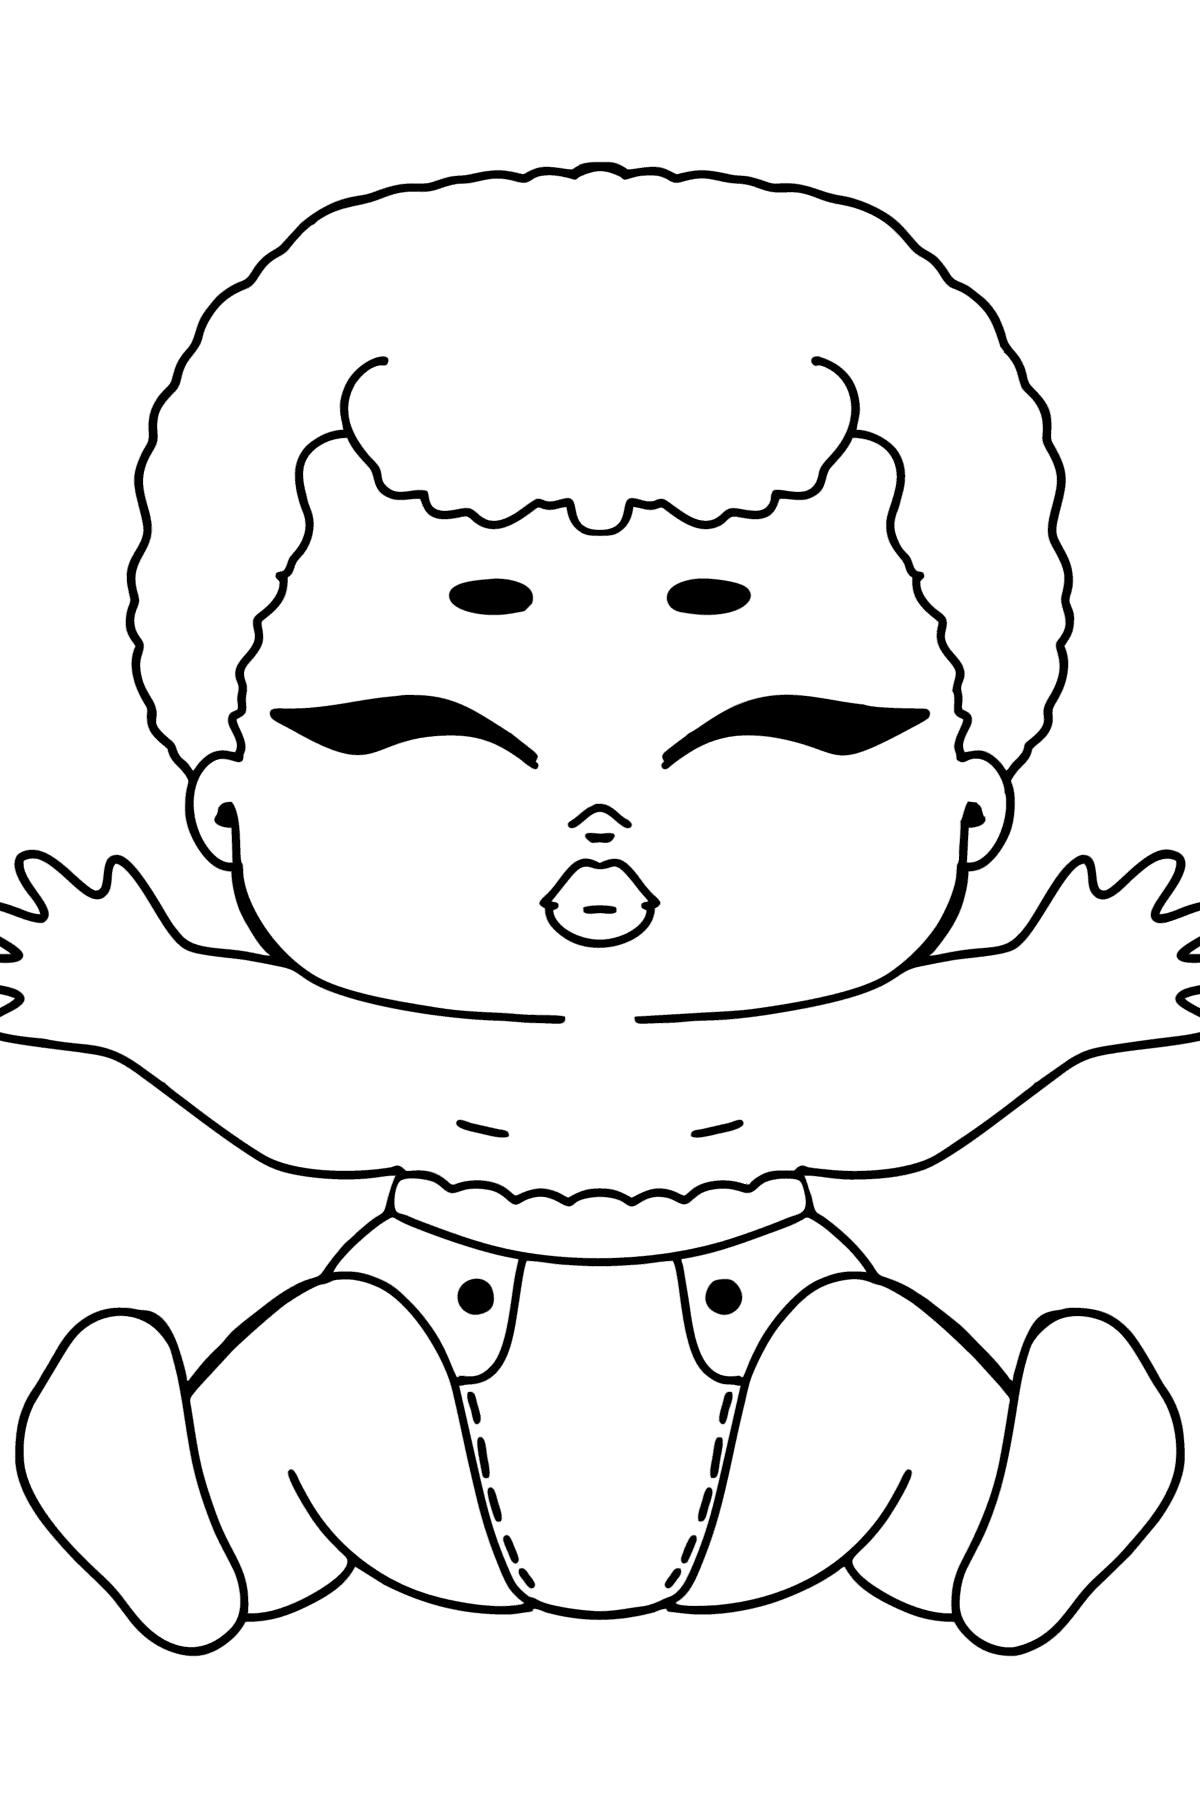 LOL Surprise Lil Sleeping B.B. coloring page - Coloring Pages for Kids